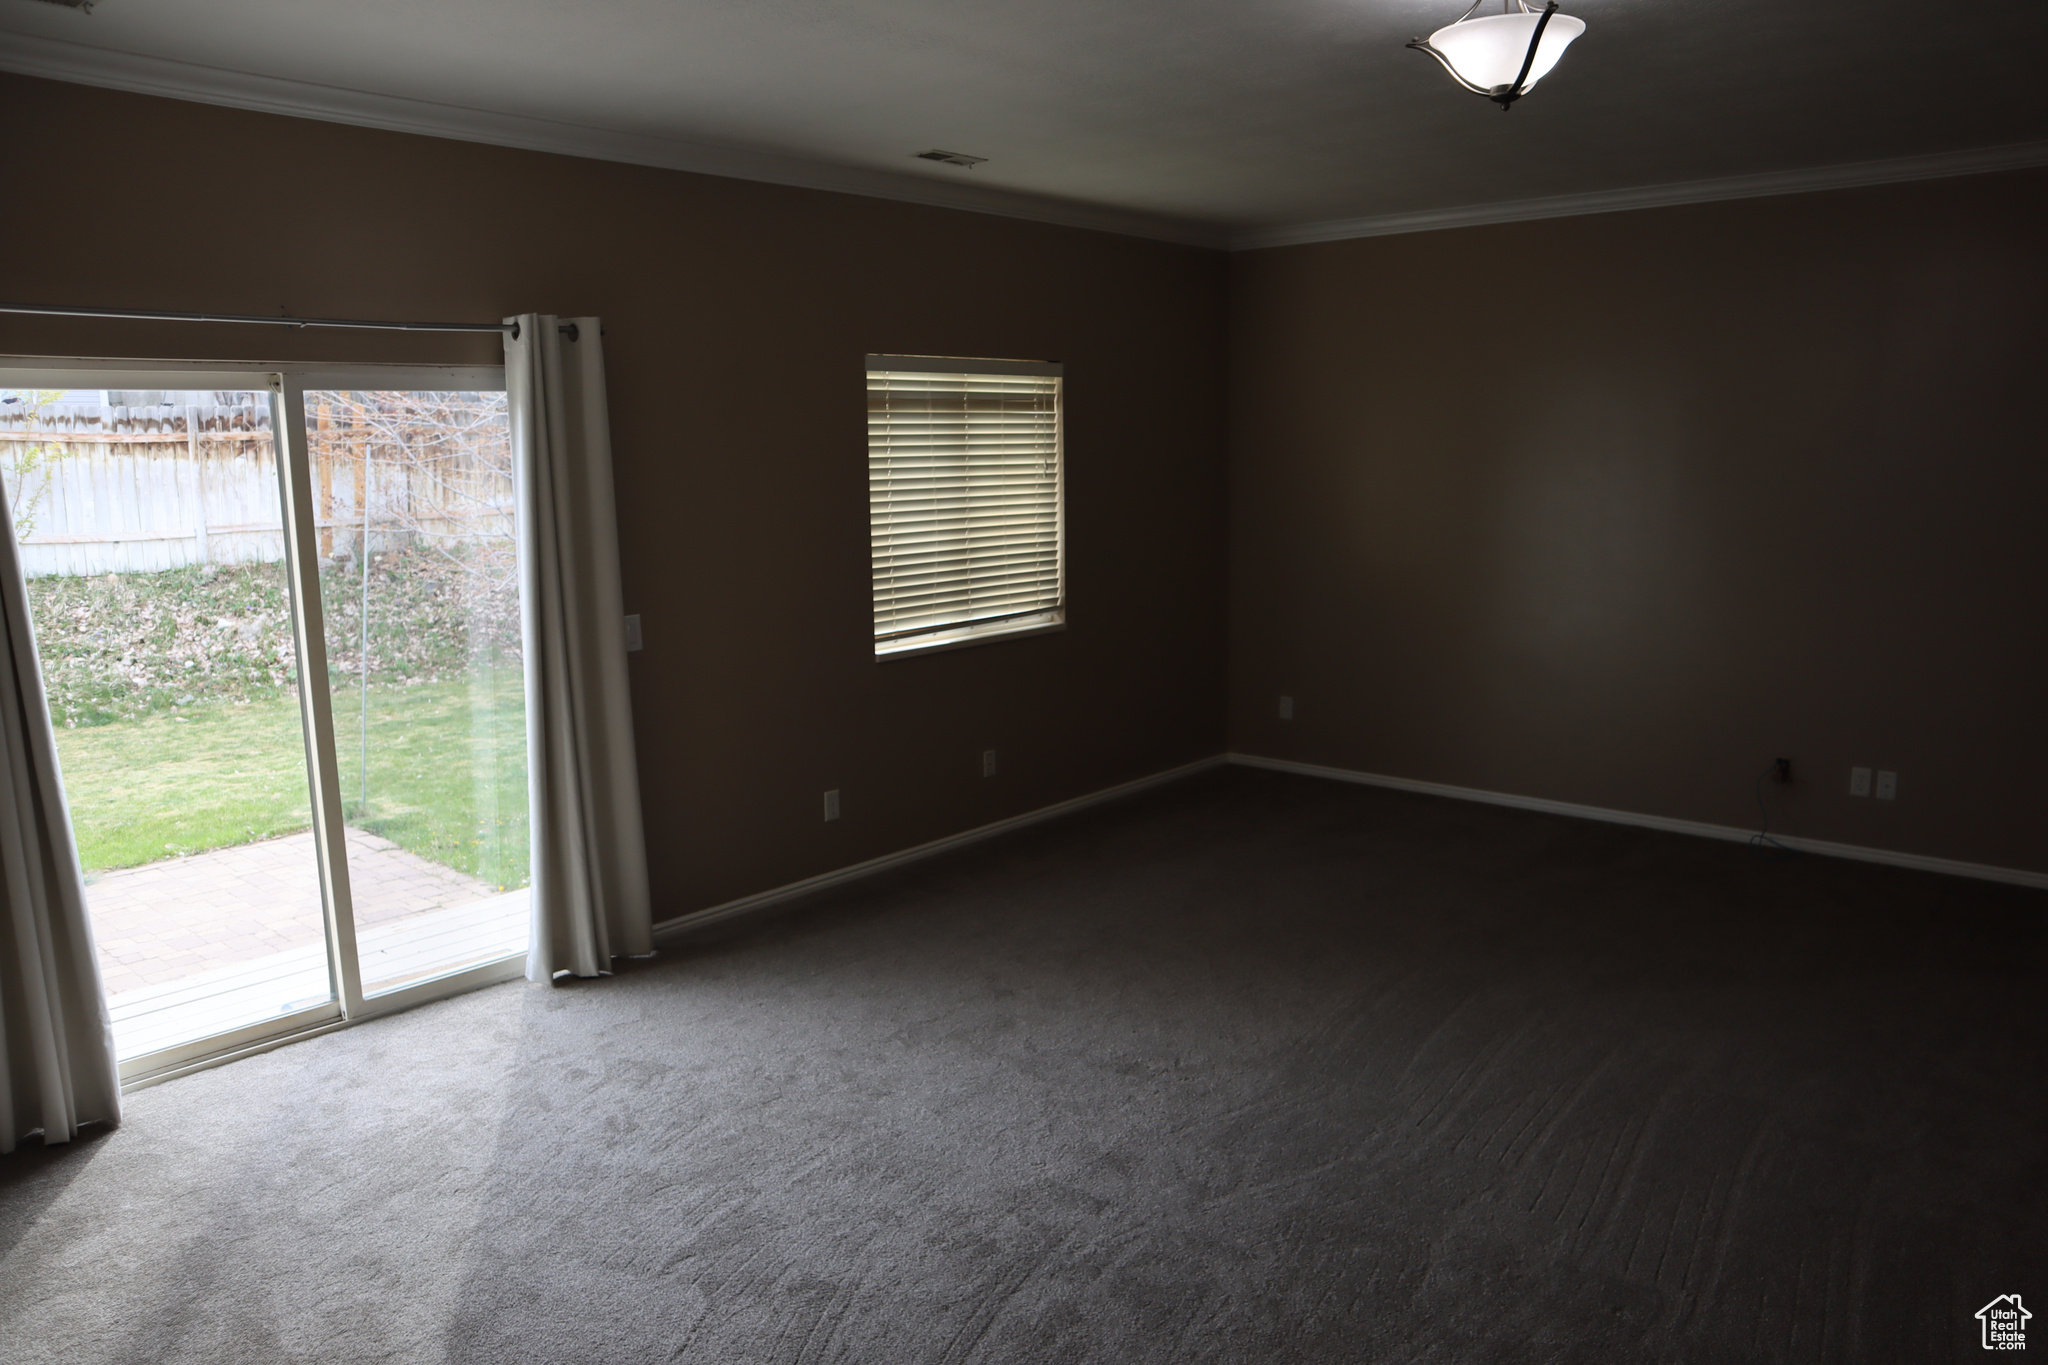 Carpeted spare room featuring a wealth of natural light and crown molding